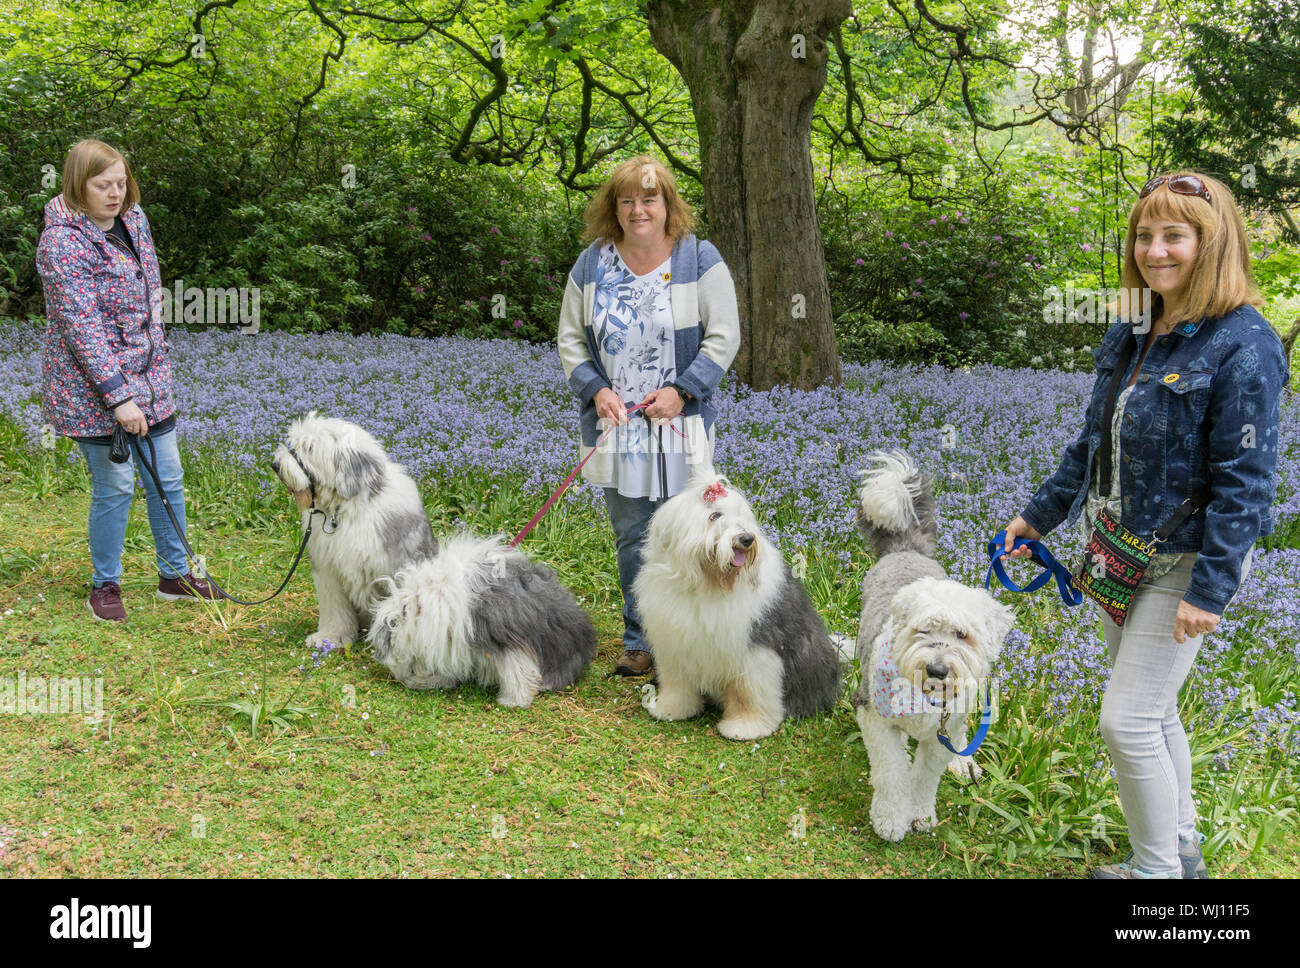 Three woman with four English sheepdogs stop during a walk in Thornbridge Hall Gardens, Derbyshire, UK Stock Photo